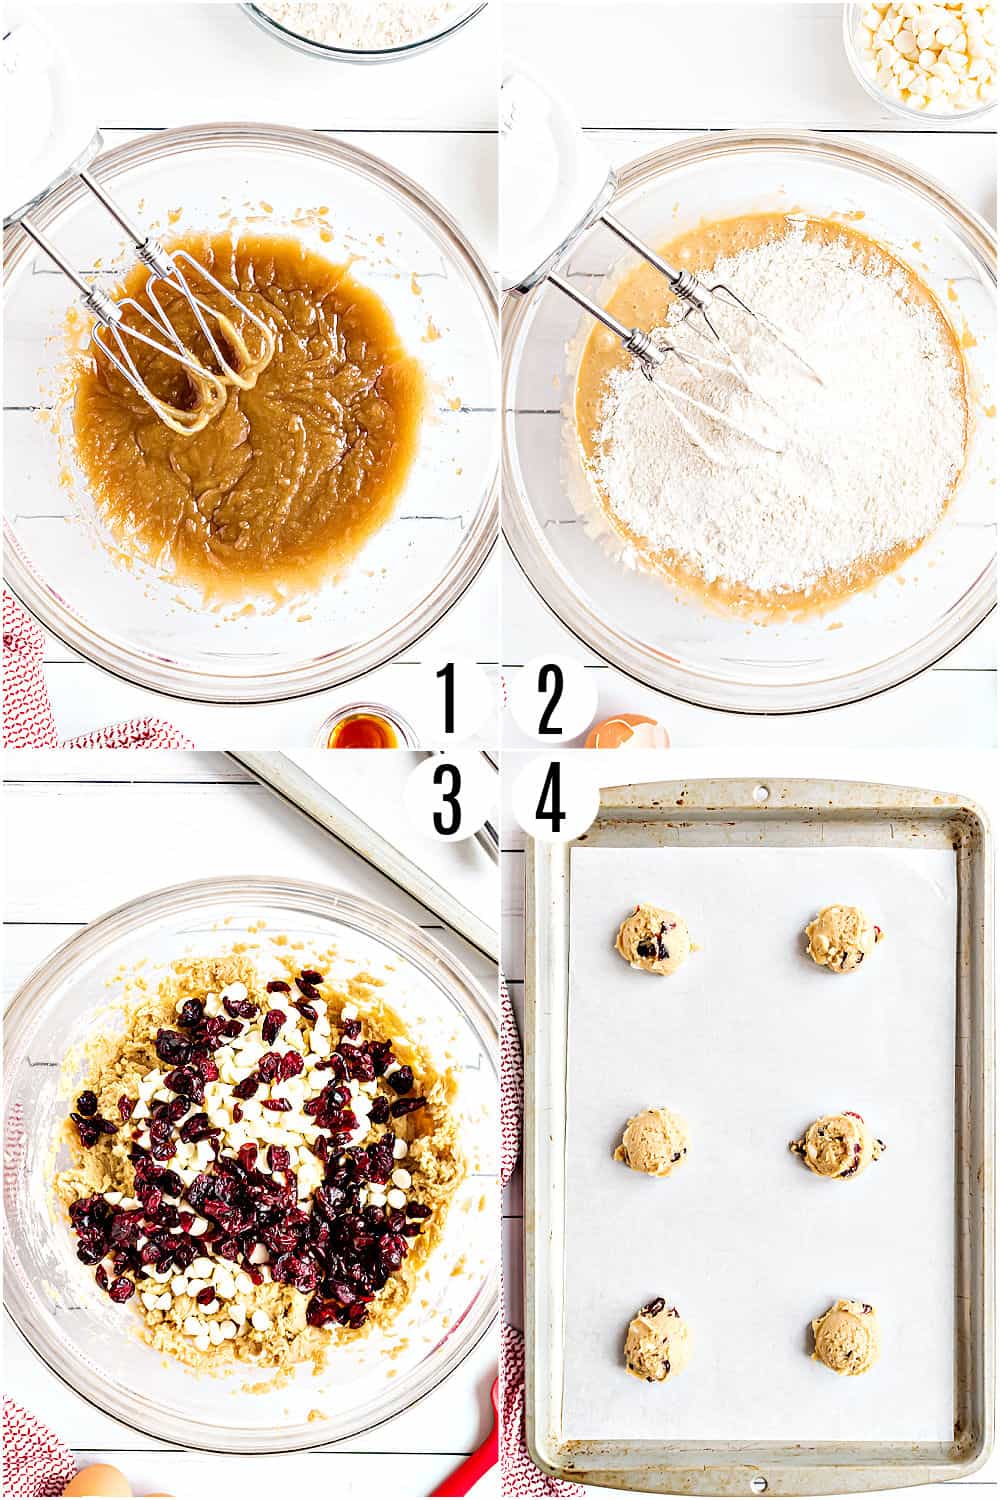 Step by step photos showing how to make white chocolate cranberry cookies.